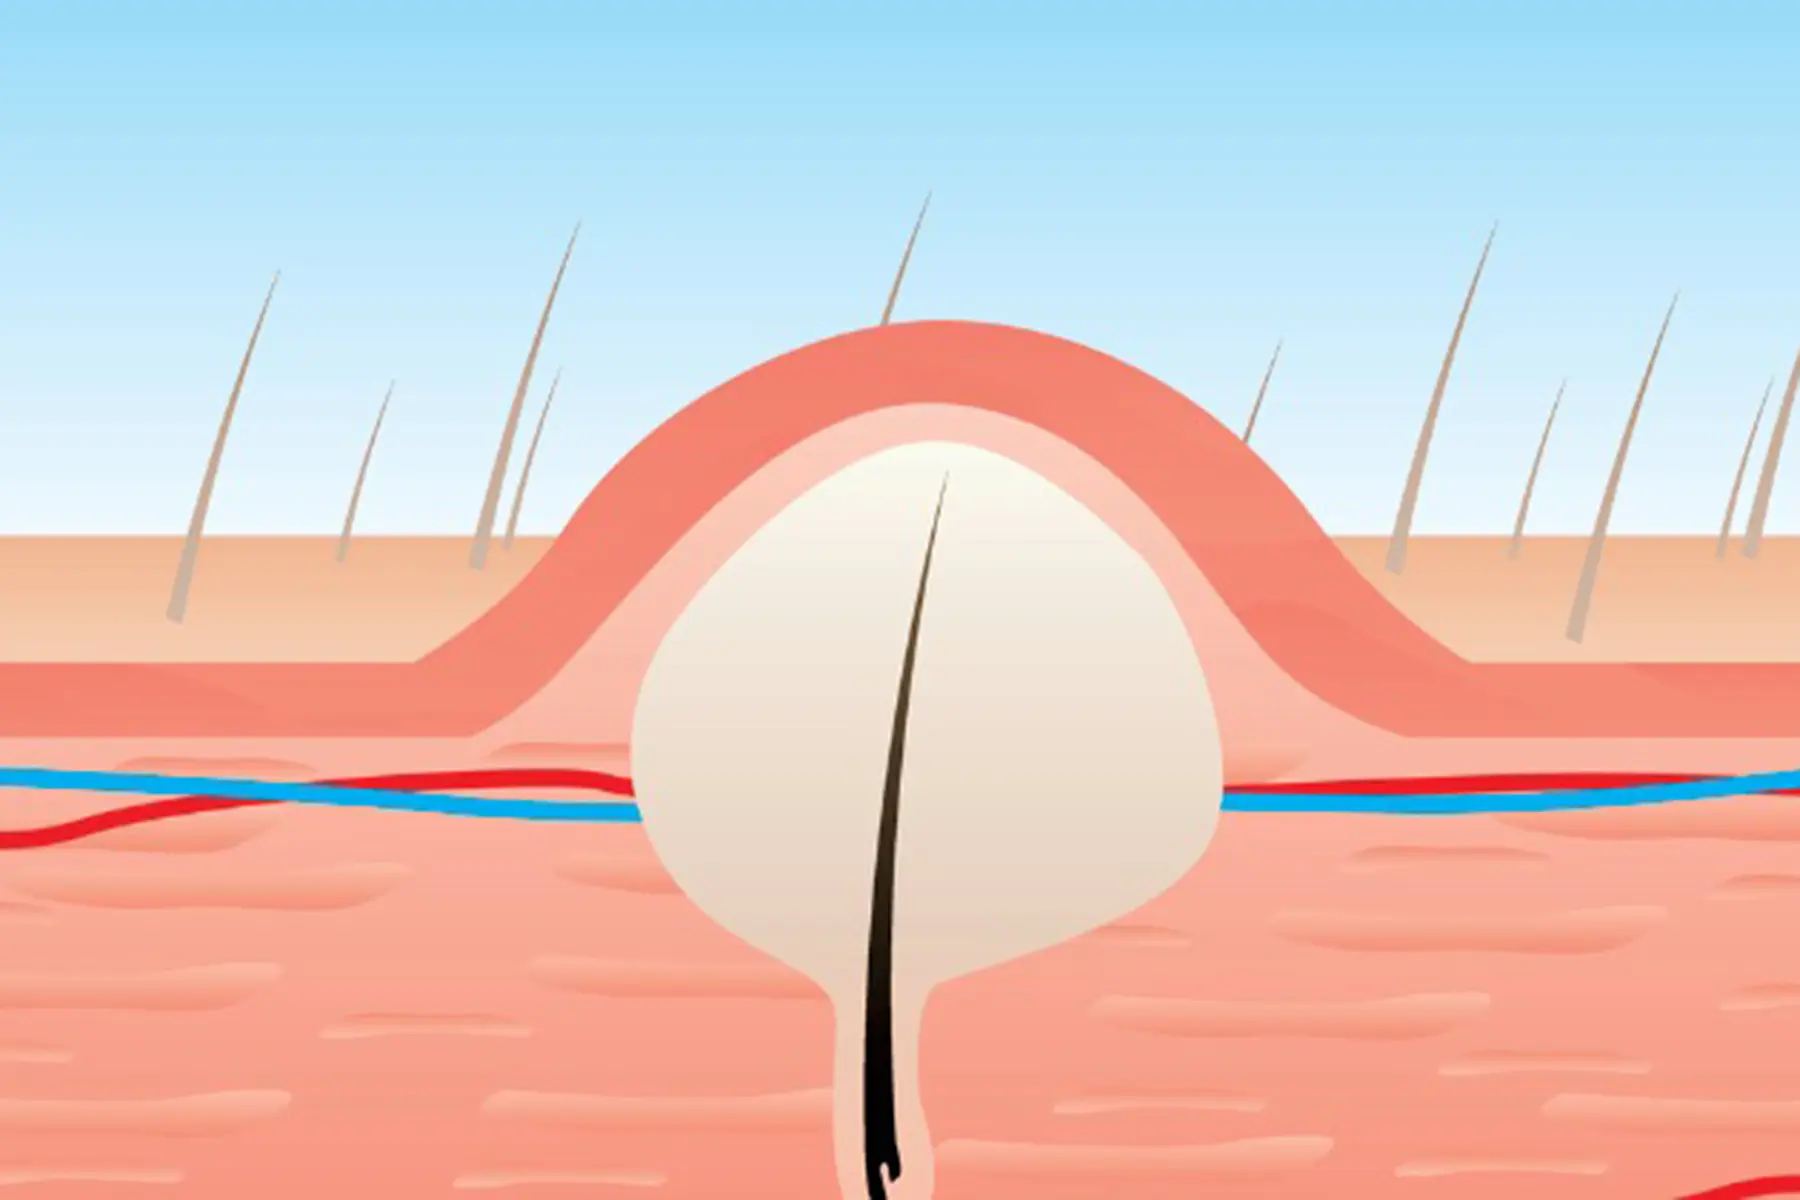 Image of an ingrown hair causing a bump from below the surface of the skin.